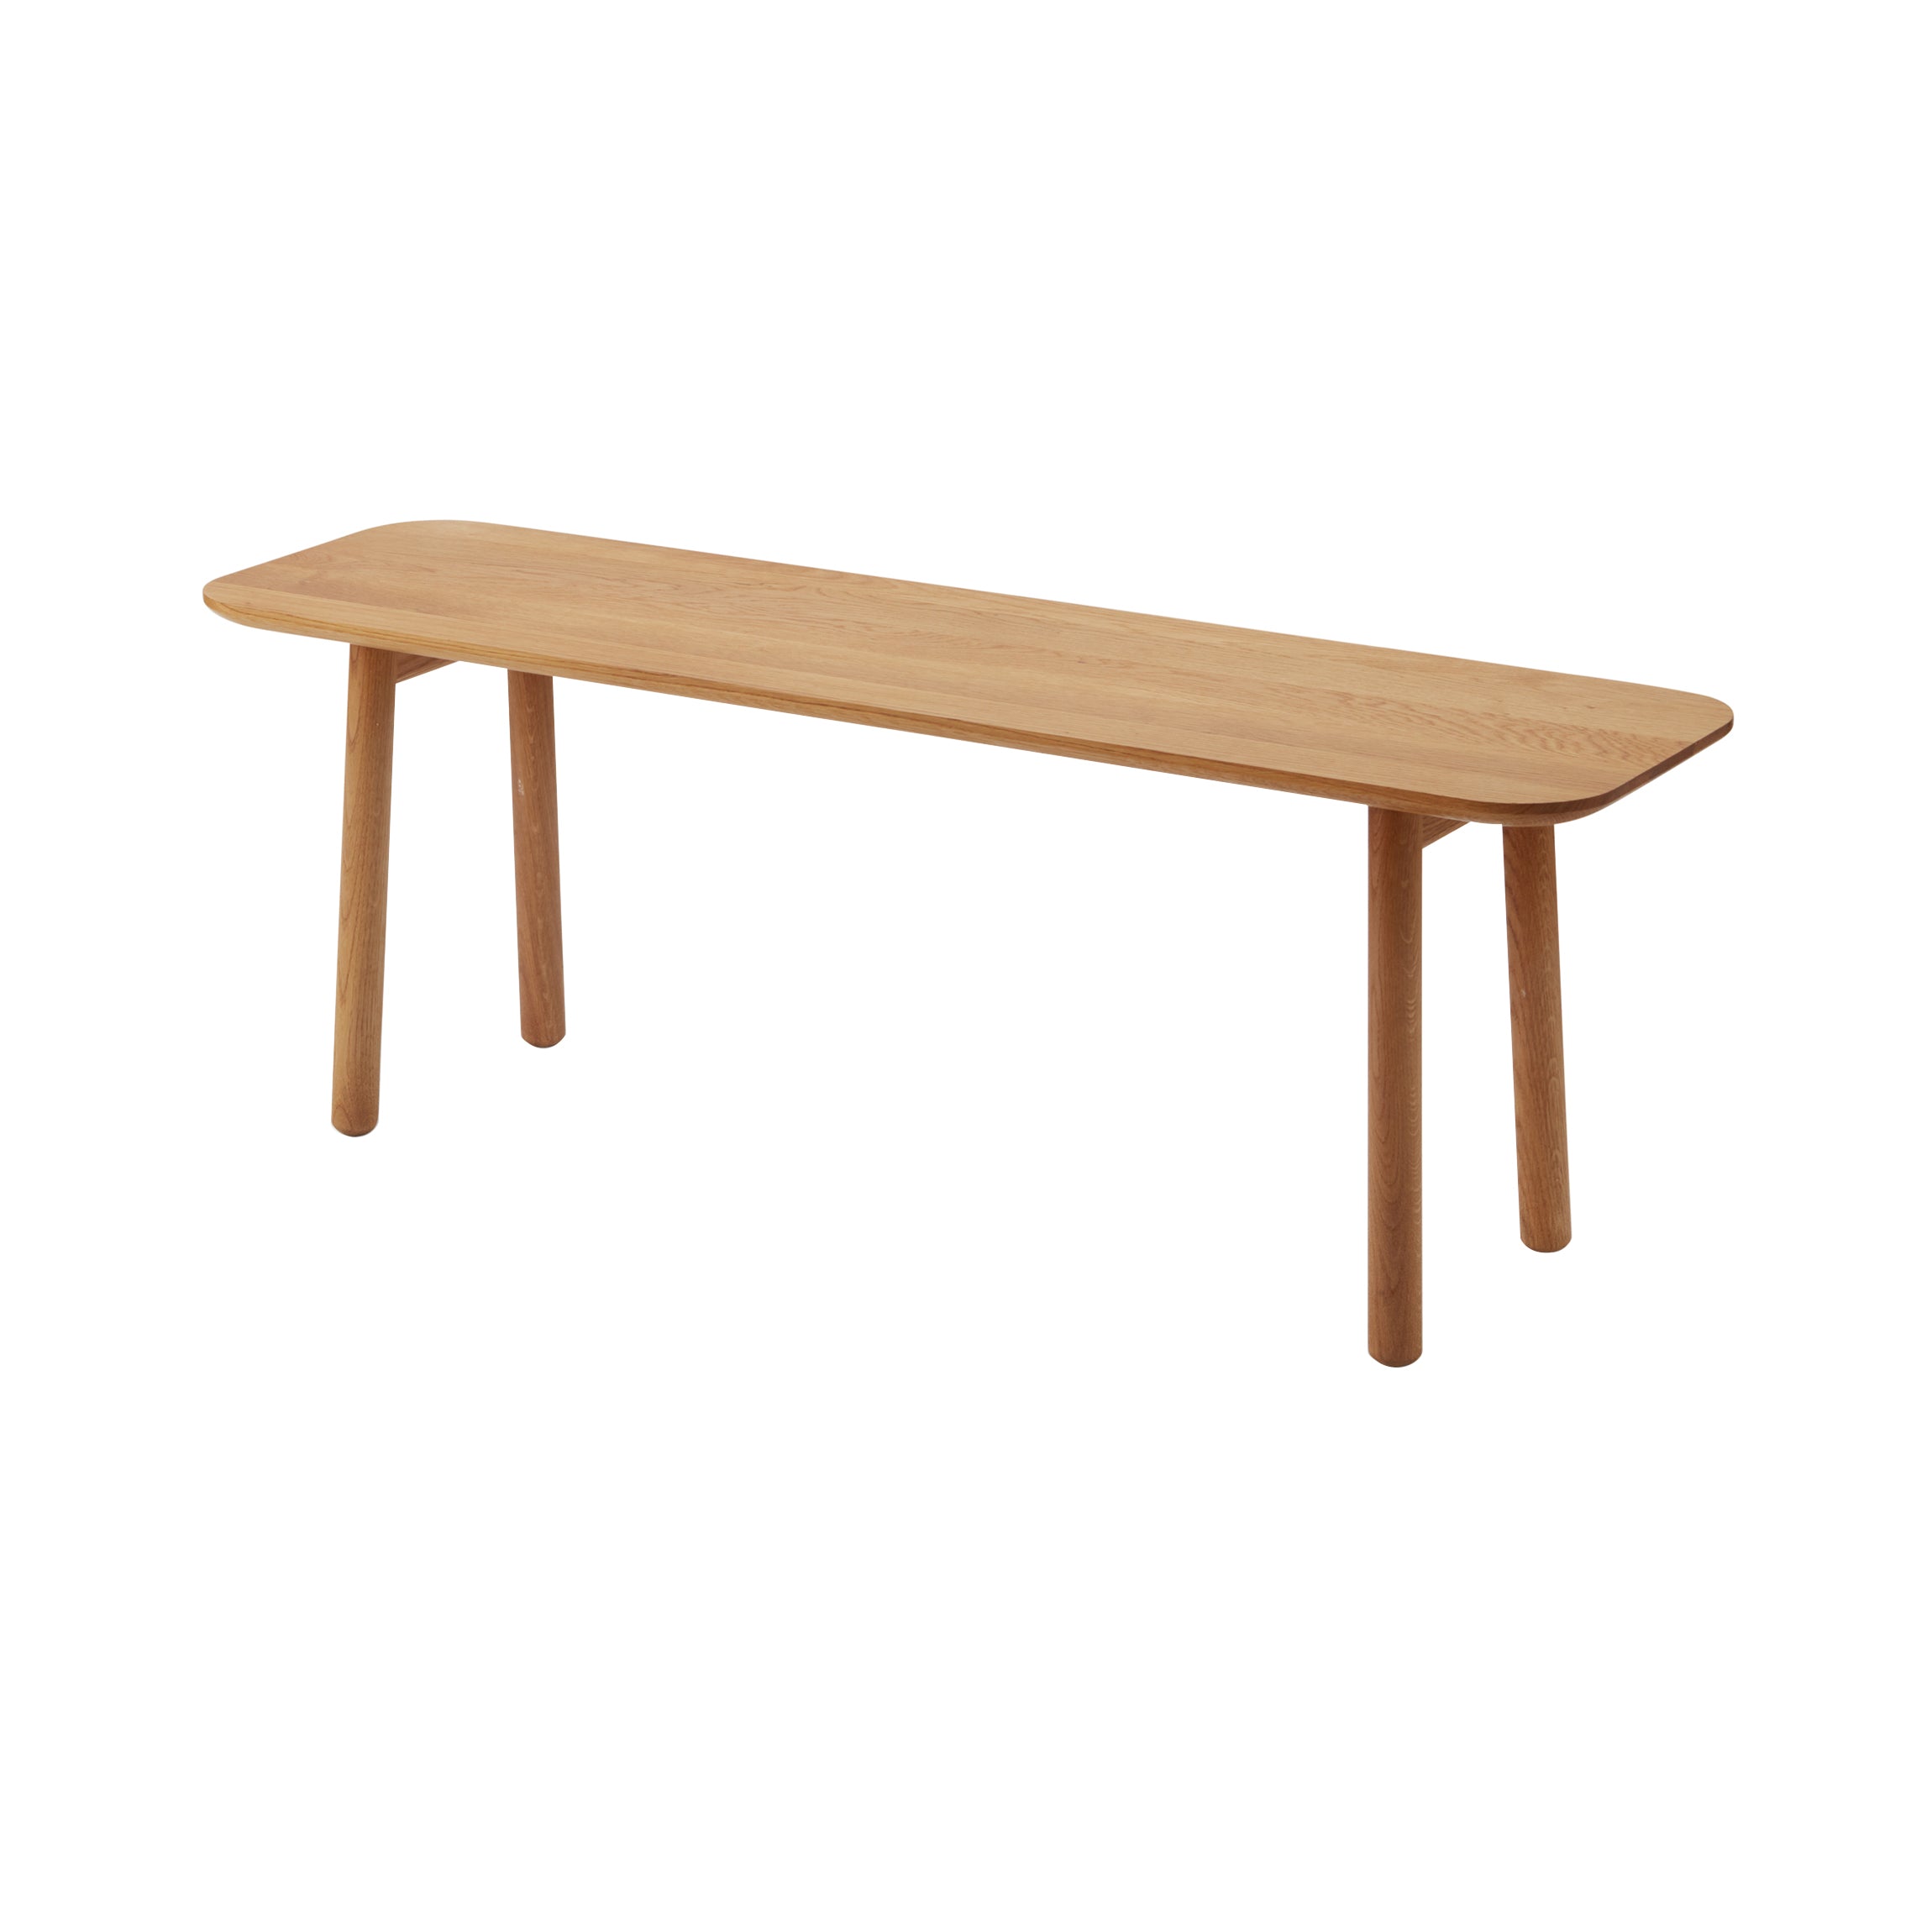 Hven Bench: Without Cushion + Oiled Oak